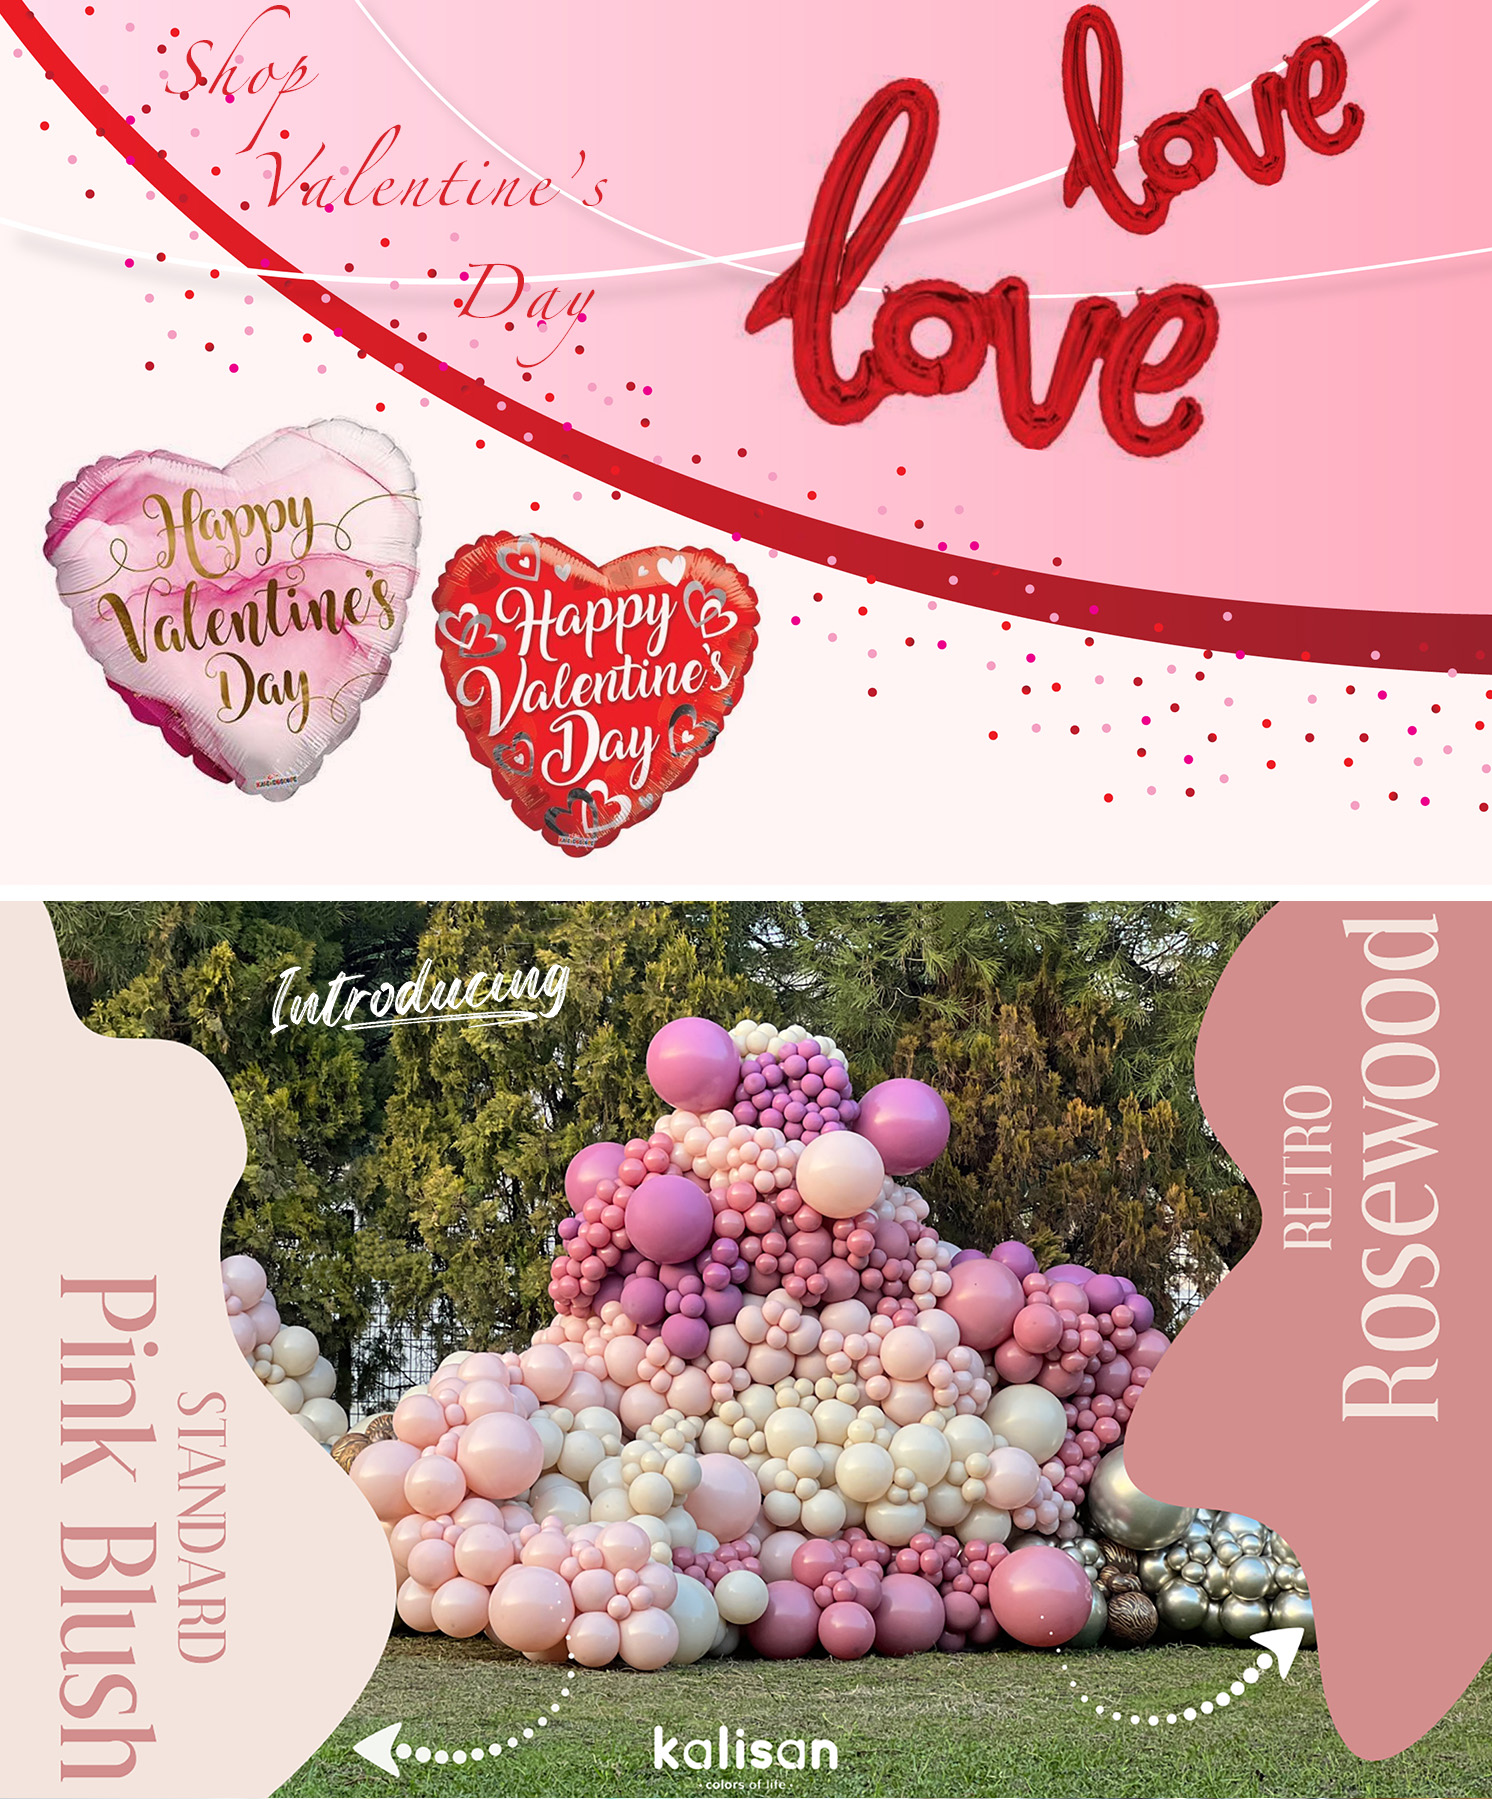 Valentine's Day & new Kalisan products